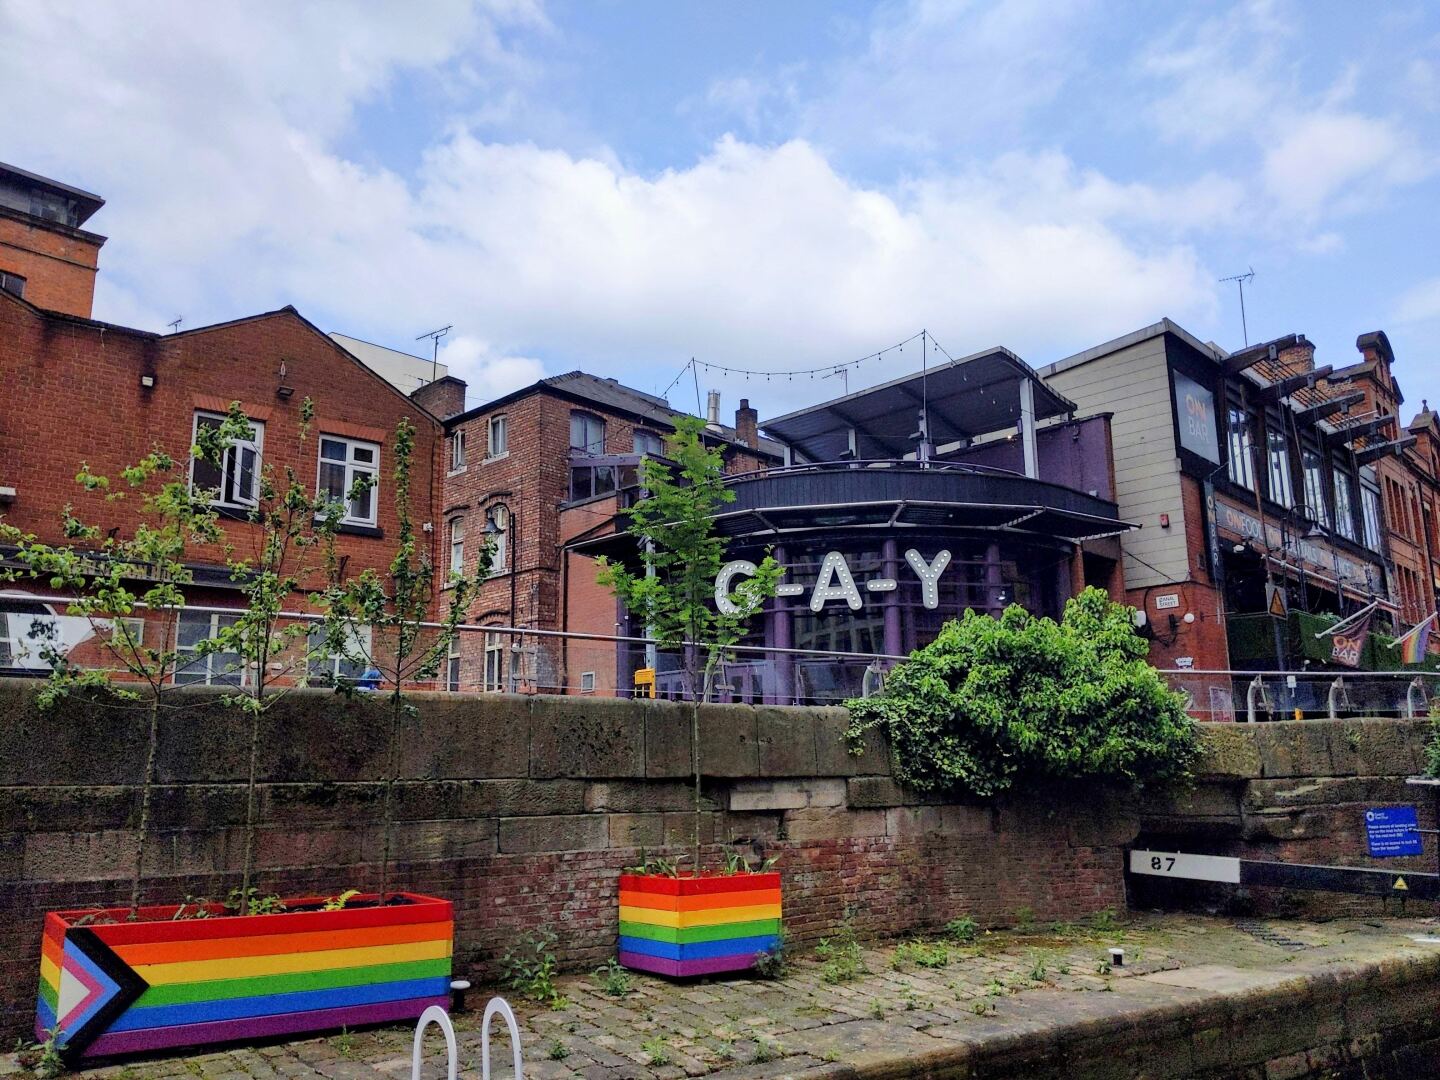 <h2>LGBTQ+ pride</h2> <p>Manchester’s LGBTQ neighborhood along Canal Street, affectionately dubbed Gay Village, is home to one of the oldest openly gay venues in the city: <a class="Link" href="https://www.visitmanchester.com/food-and-drink/new-union-hotel-and-show-bar-p184261" rel="noopener">New Union</a> dates to the 1860s and is now a bar and hotel. Canal Street is also lined with festive-feeling restaurants and bars and wallpapered with posters for drag brunches and shows. In June, the neighborhood is the epicenter for <a class="Link" href="https://www.visitmanchester.com/ideas-and-inspiration/lgbt" rel="noopener">Manchester Pride</a>, and in July it hosts Sparkle, the national transgender celebration. </p> <p>Check out the Visit Manchester website for a <a class="Link" href="https://www.visitmanchester.com/ideas-and-inspiration/manchester-lgbtq-trail" rel="noopener">downloadable LGBTQ self-guided tour</a>, which includes a stop at the Alan Turing memorial. The genius who invented the computer moved here after his code-breaking success in World War II to work at the University of Manchester (the alma mater of Benedict Cumberbatch, who played Turing in the 2014 movie <i>The Imitation Game</i>). Sadly, Manchester is also where Turing was arrested for being gay and sentenced to chemical castration. He was found dead of cyanide poisoning in his home in 1954, at the age of 41. The Queen pardoned him posthumously in 2013. If you’re in the city on any June 23, stop by his <a class="Link" href="https://secretmanchester.com/icons-alan-turing/" rel="noopener">statue</a> in Sackville Gardens; people place flowers there every year for his birthday.</p>